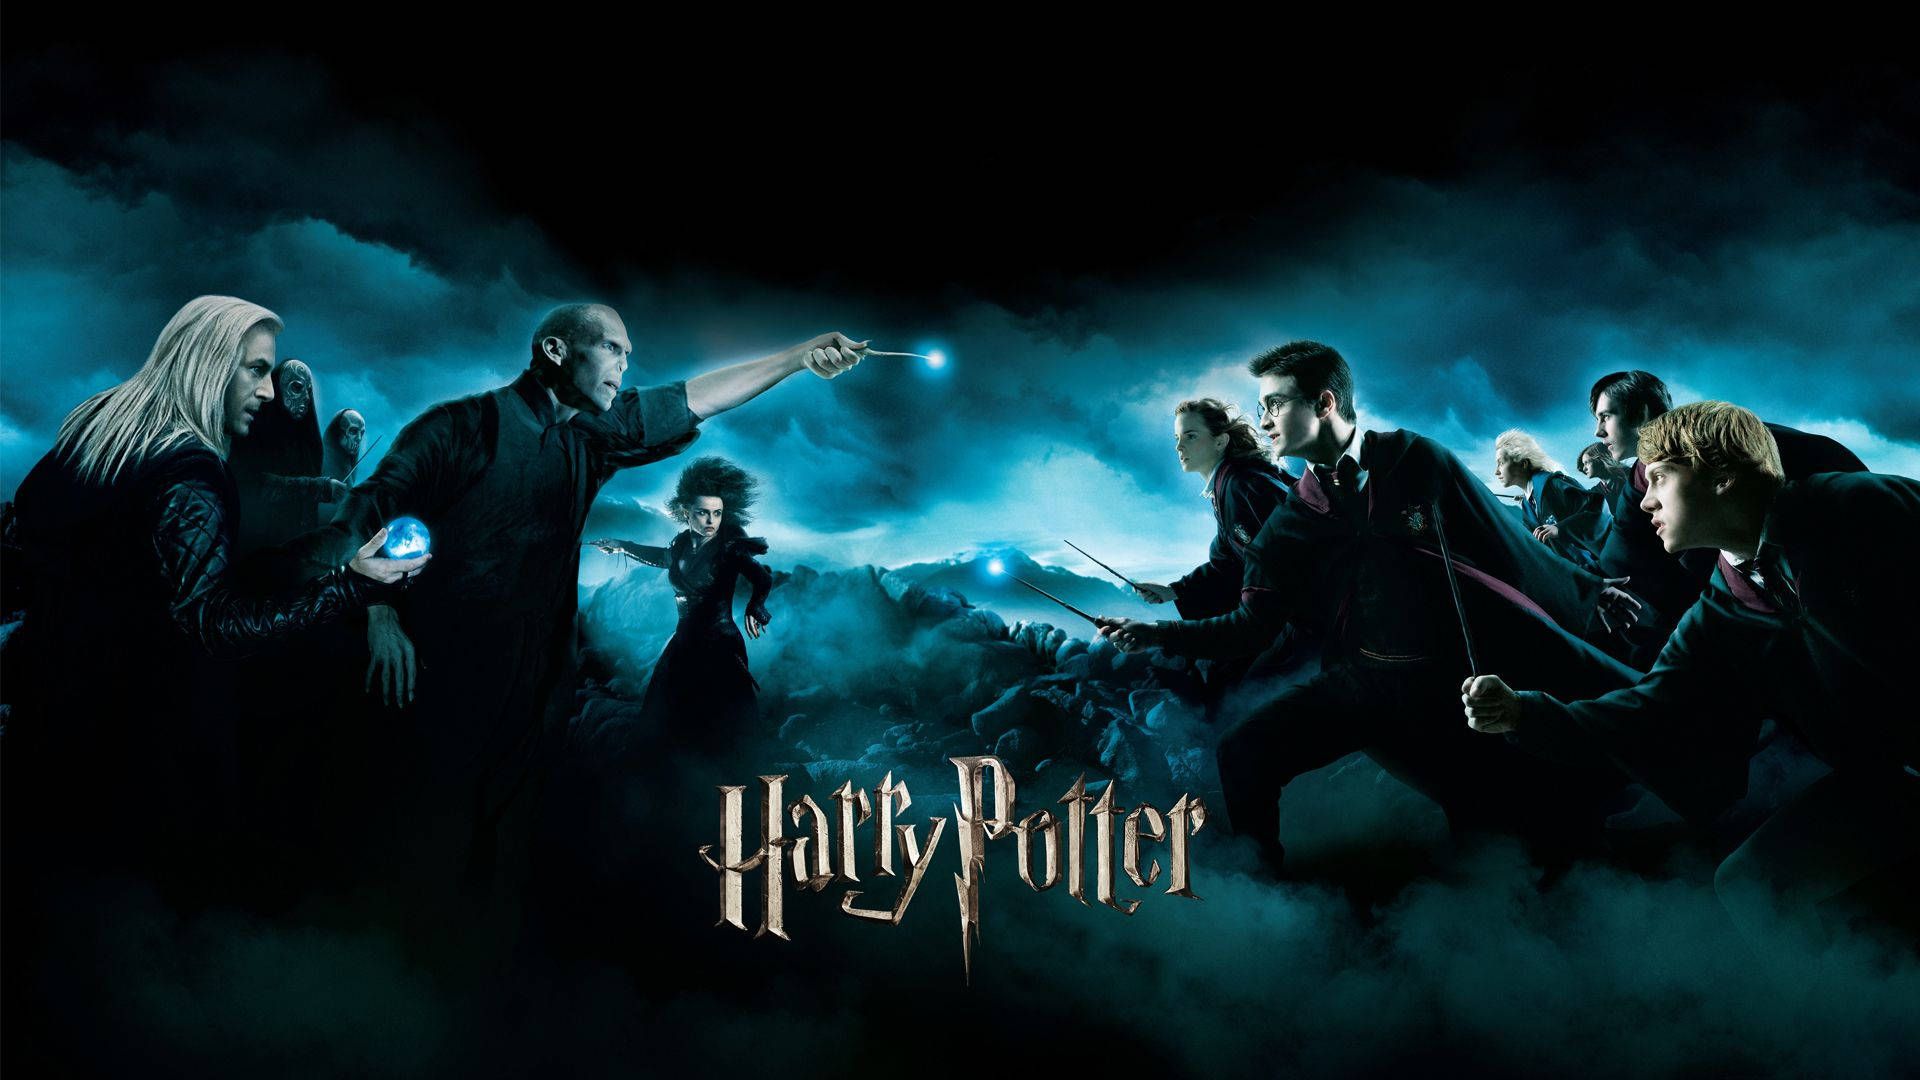 Harry potter backgrounds for free